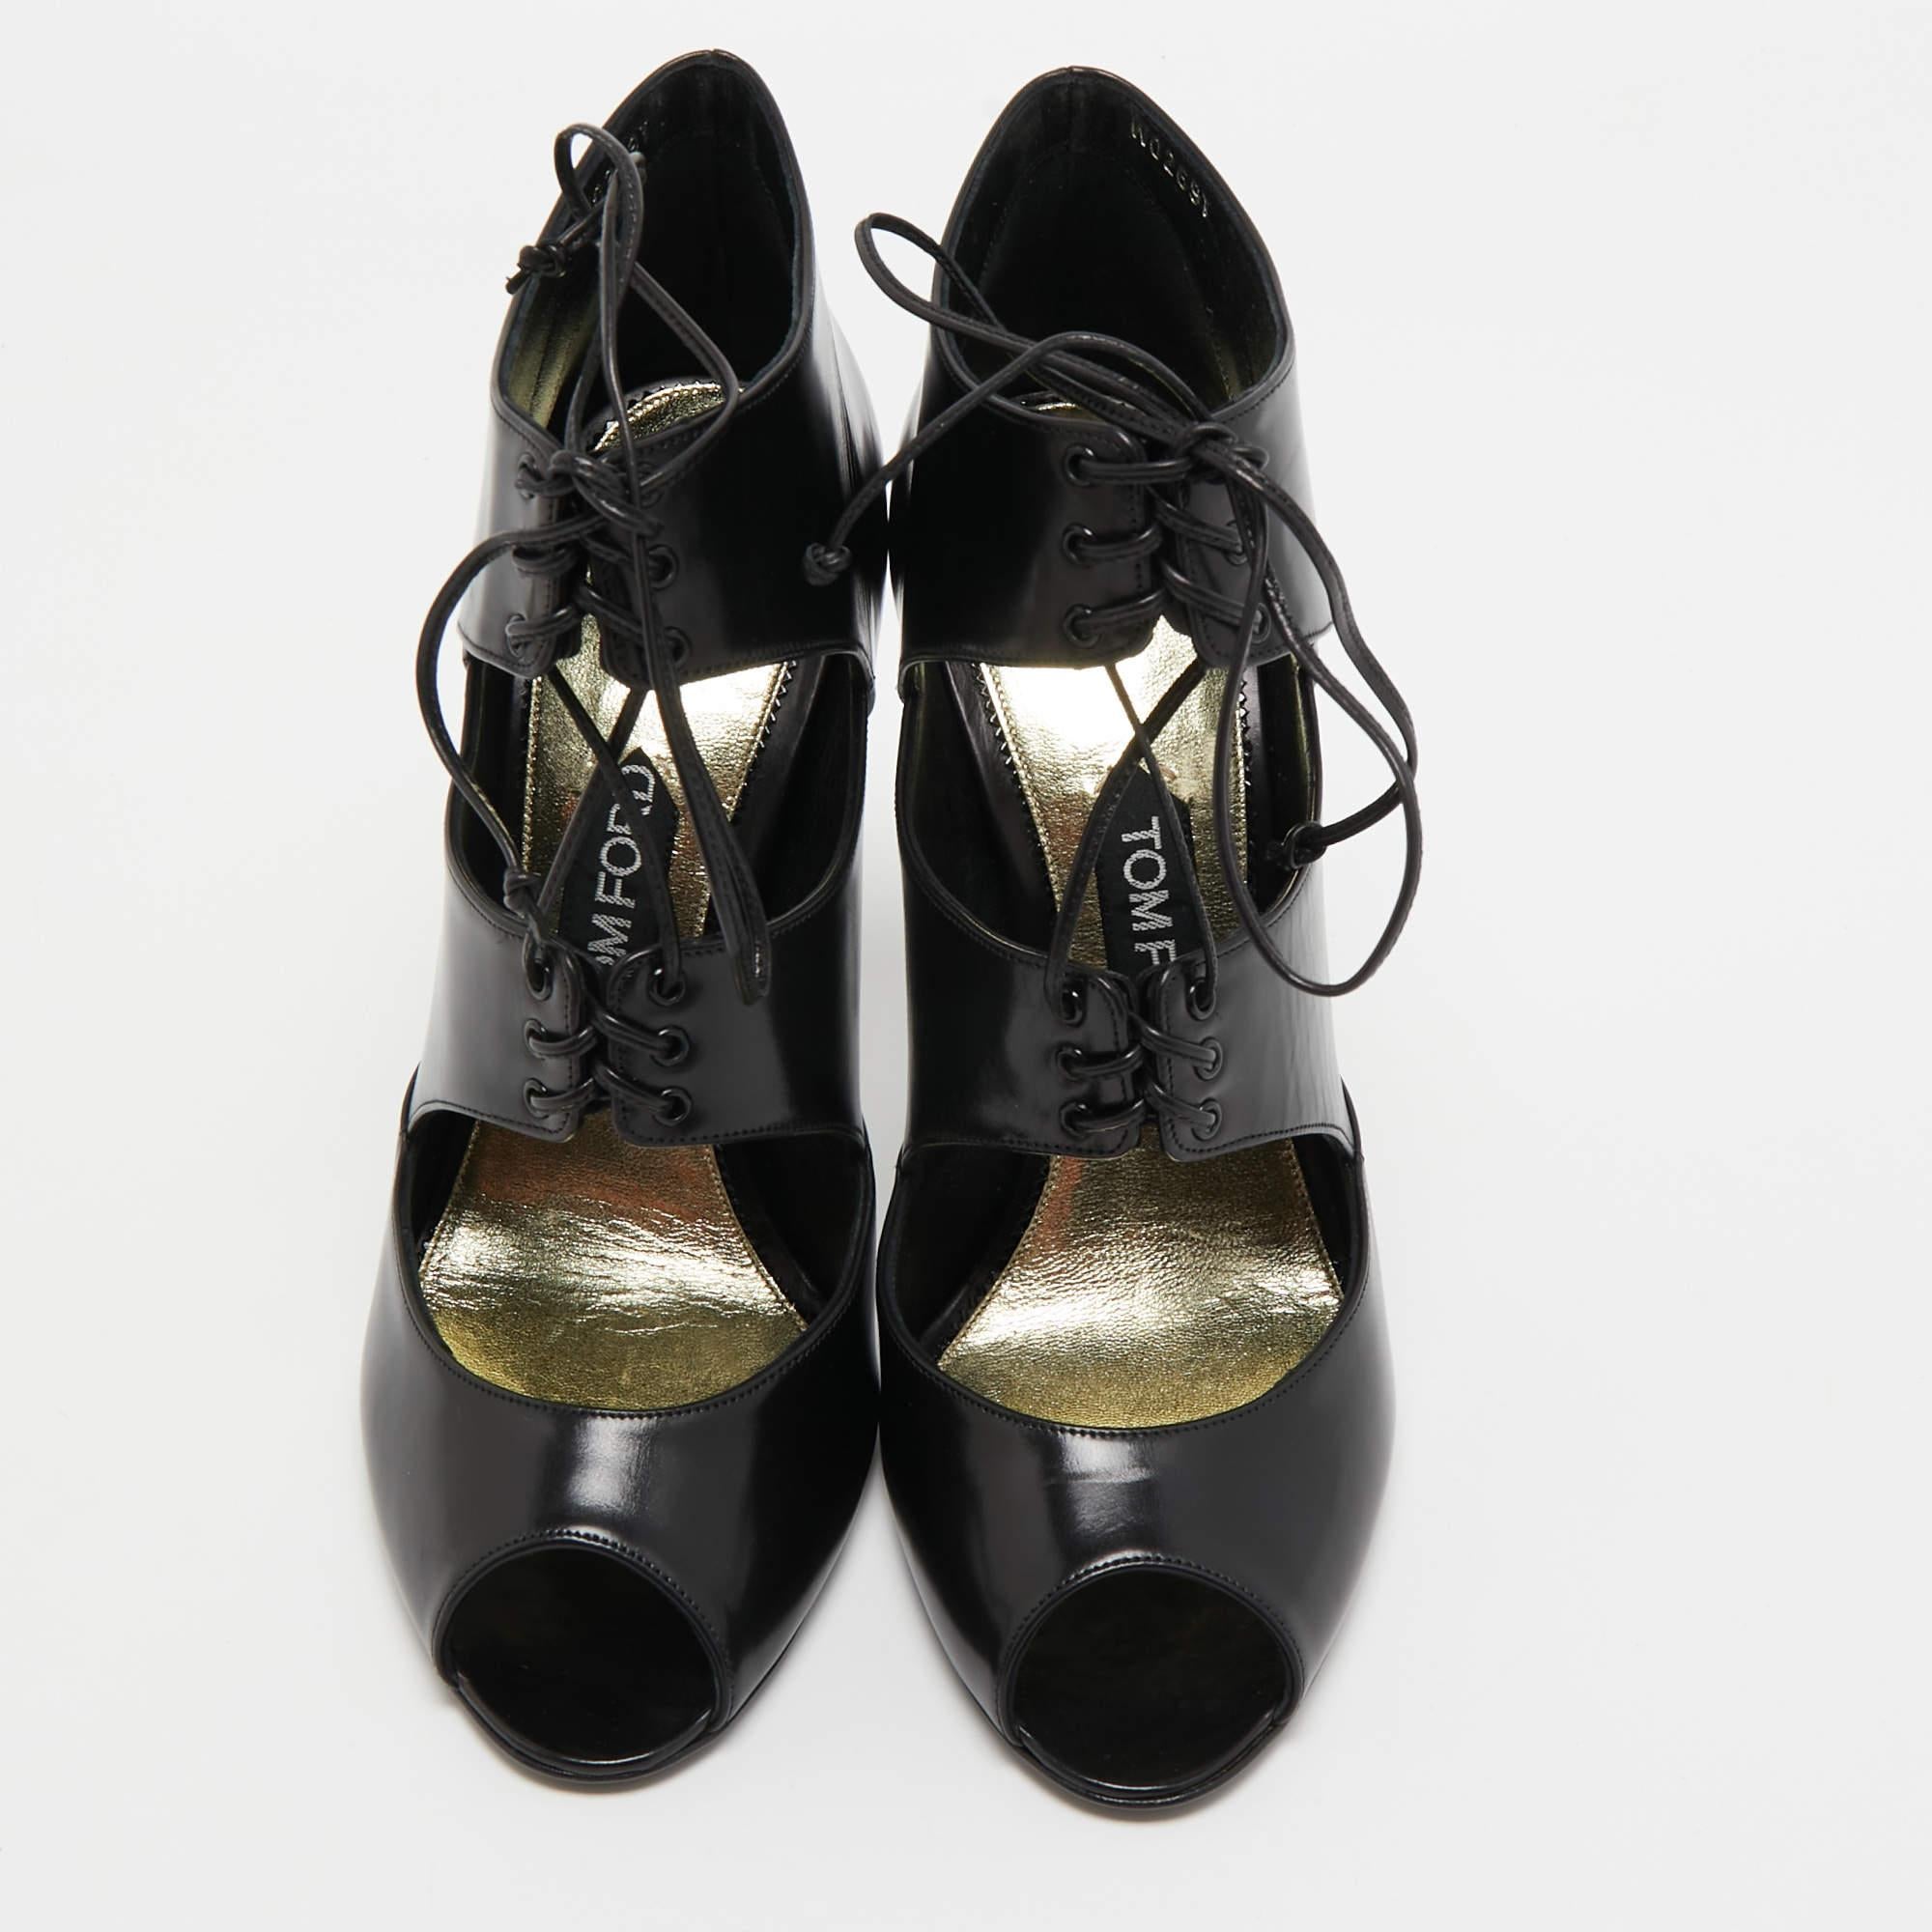 Tom Ford Black Leather Peep Toe Ankle Booties Size 39.5 In Excellent Condition For Sale In Dubai, Al Qouz 2